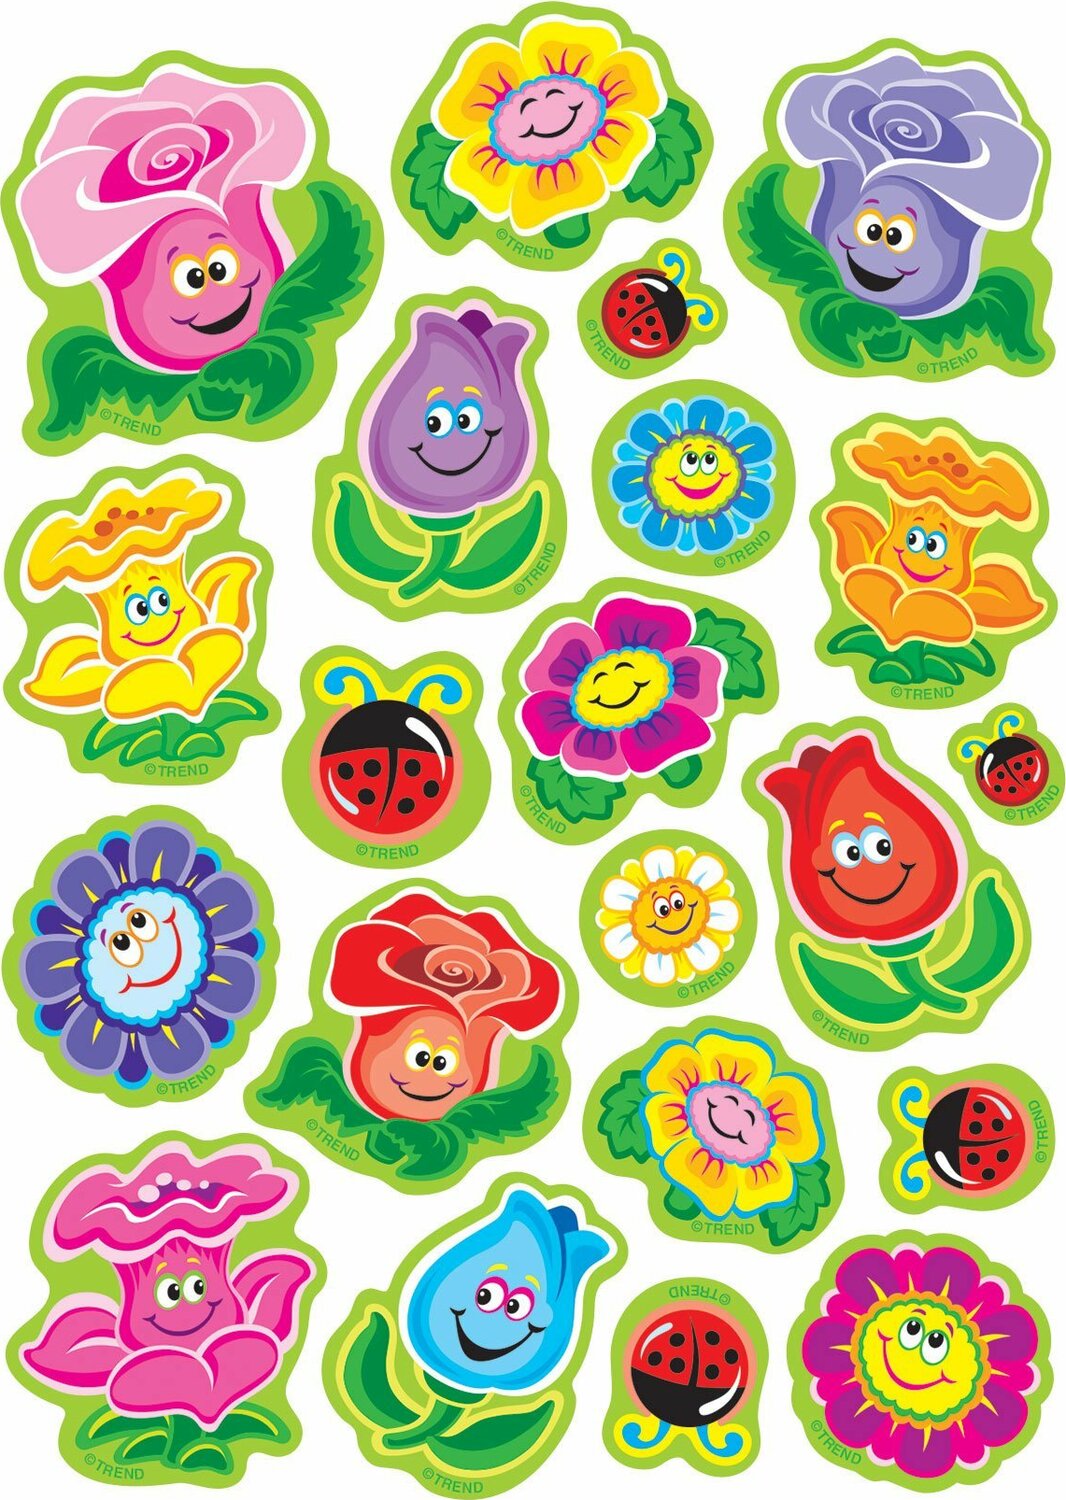 Friendly Flowers/ Floral Mixed Shapes Stinky Stickers, 84 Ct